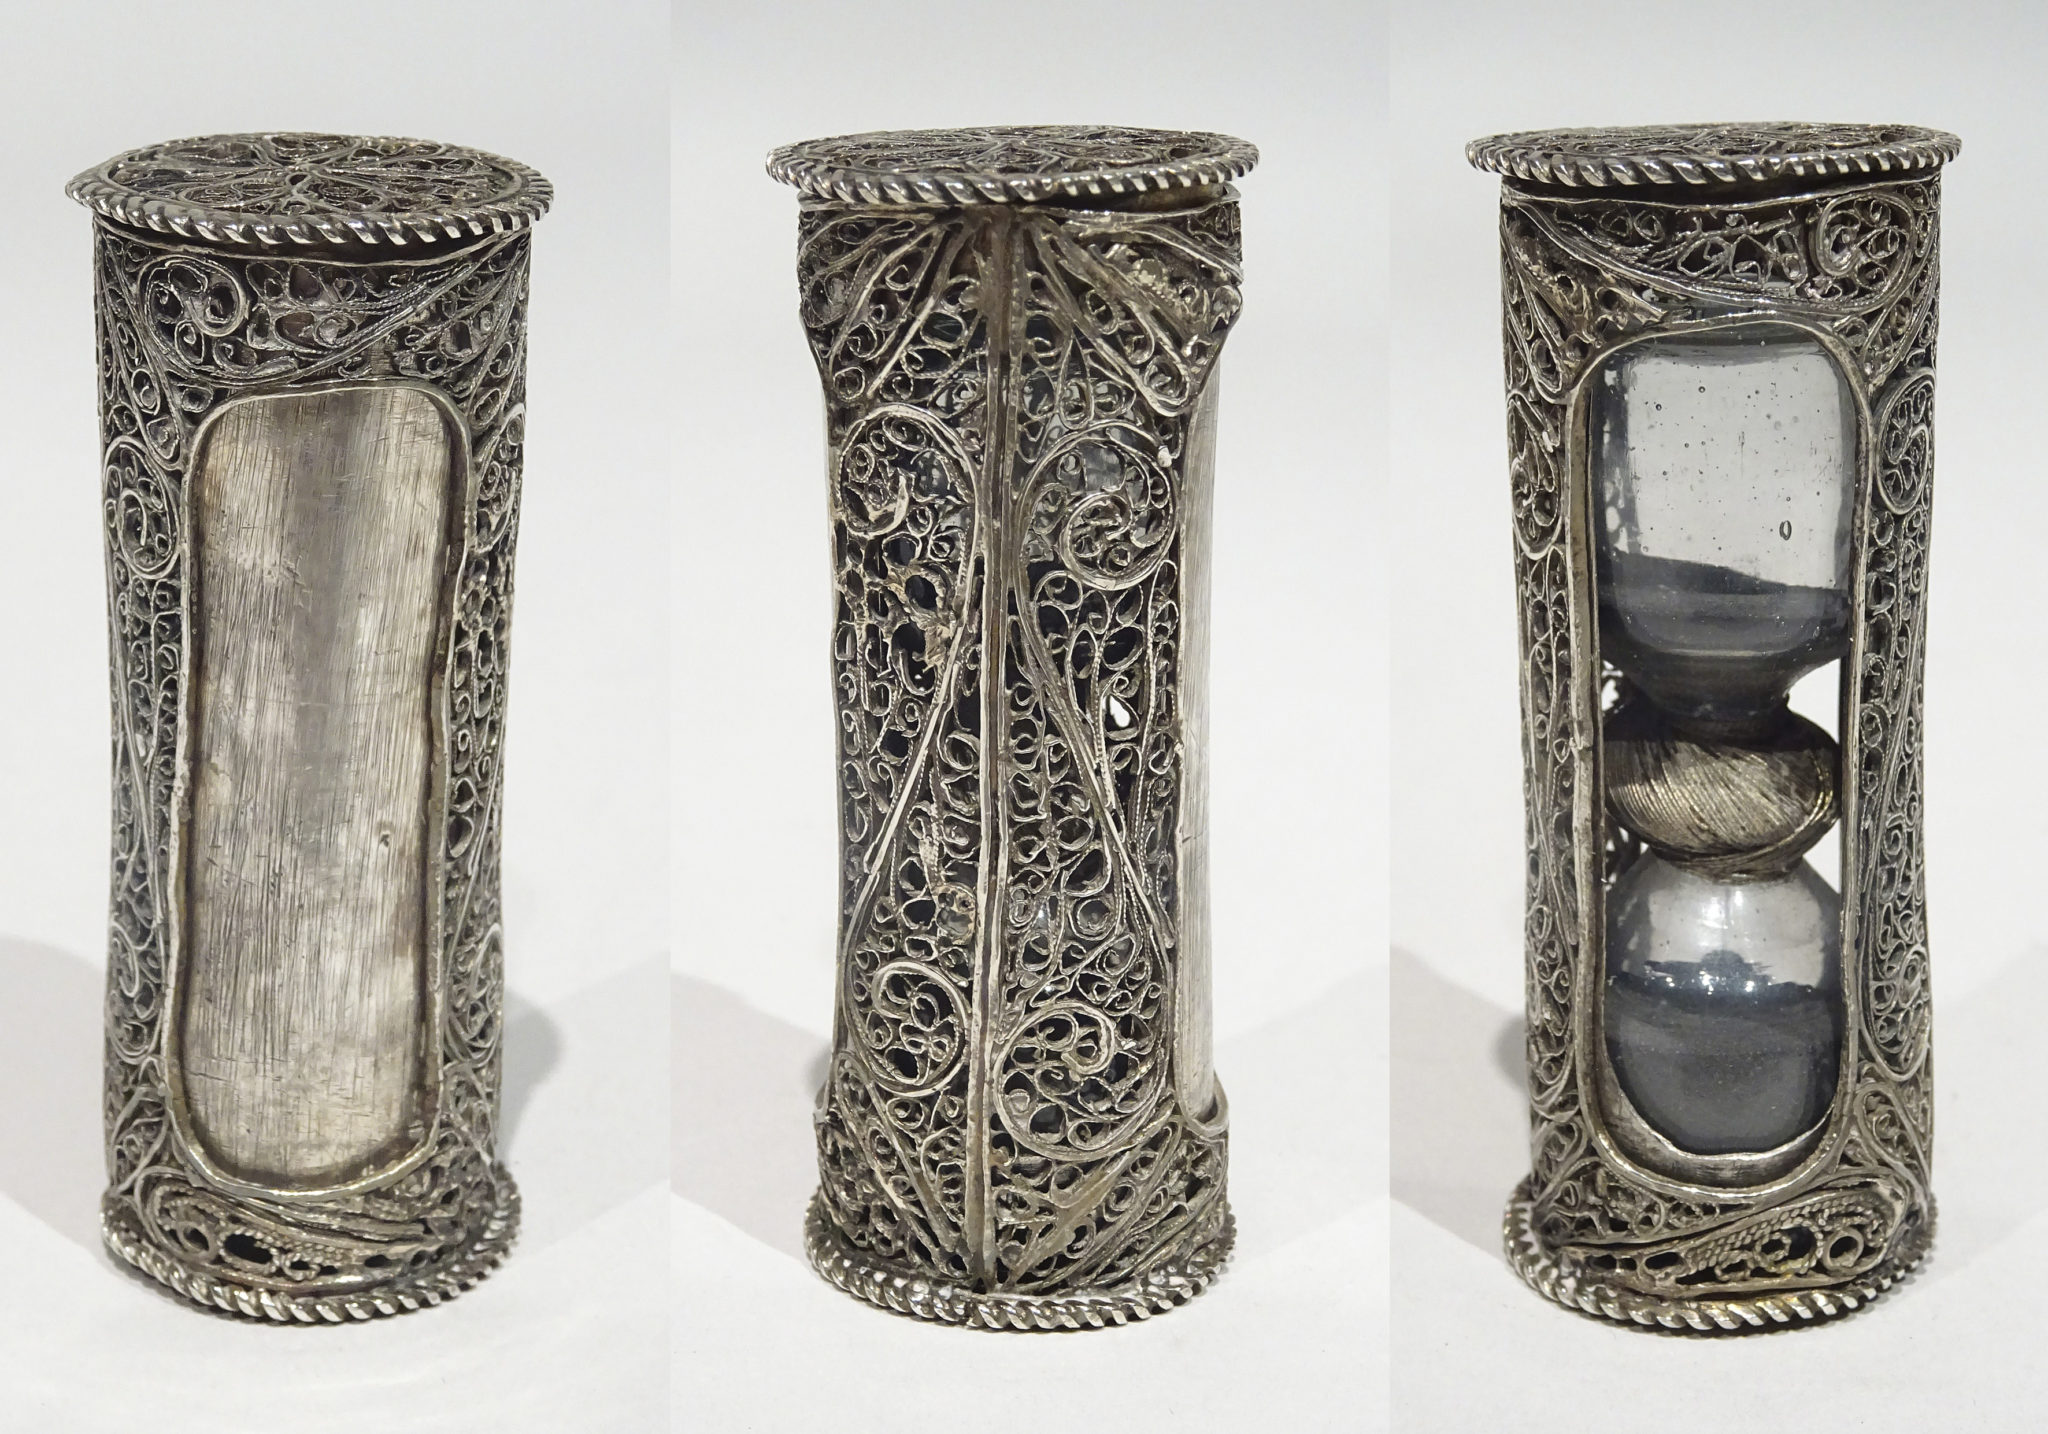 Silver filigree travel hourglass made in France circa 1620/1630.